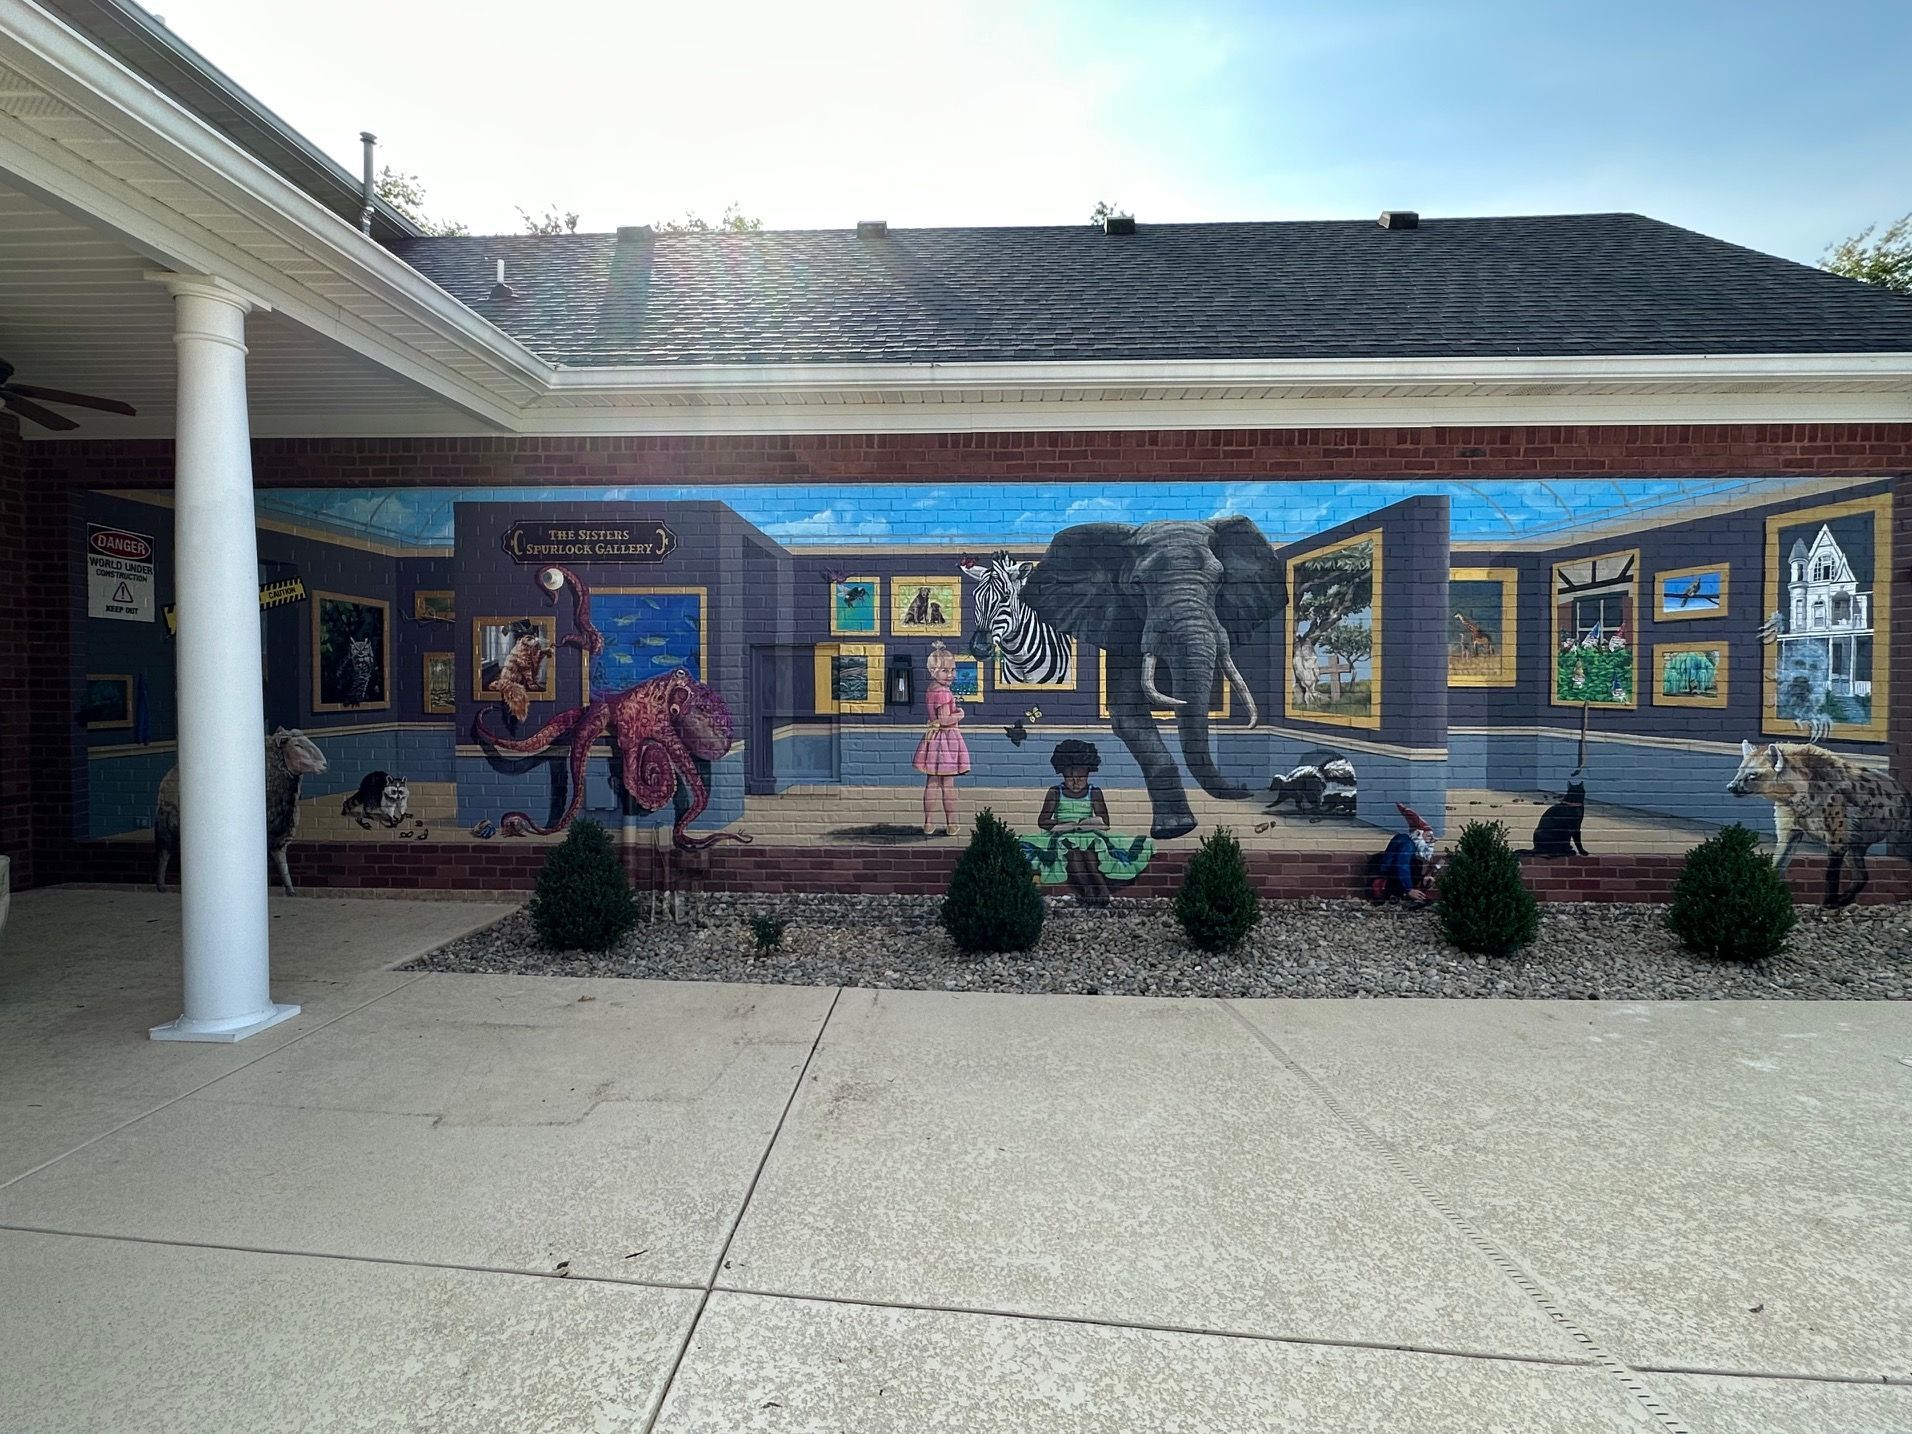 Characters in Her Books Painted on This Exterior Brick Wall - Exterior and Residential Mural Art